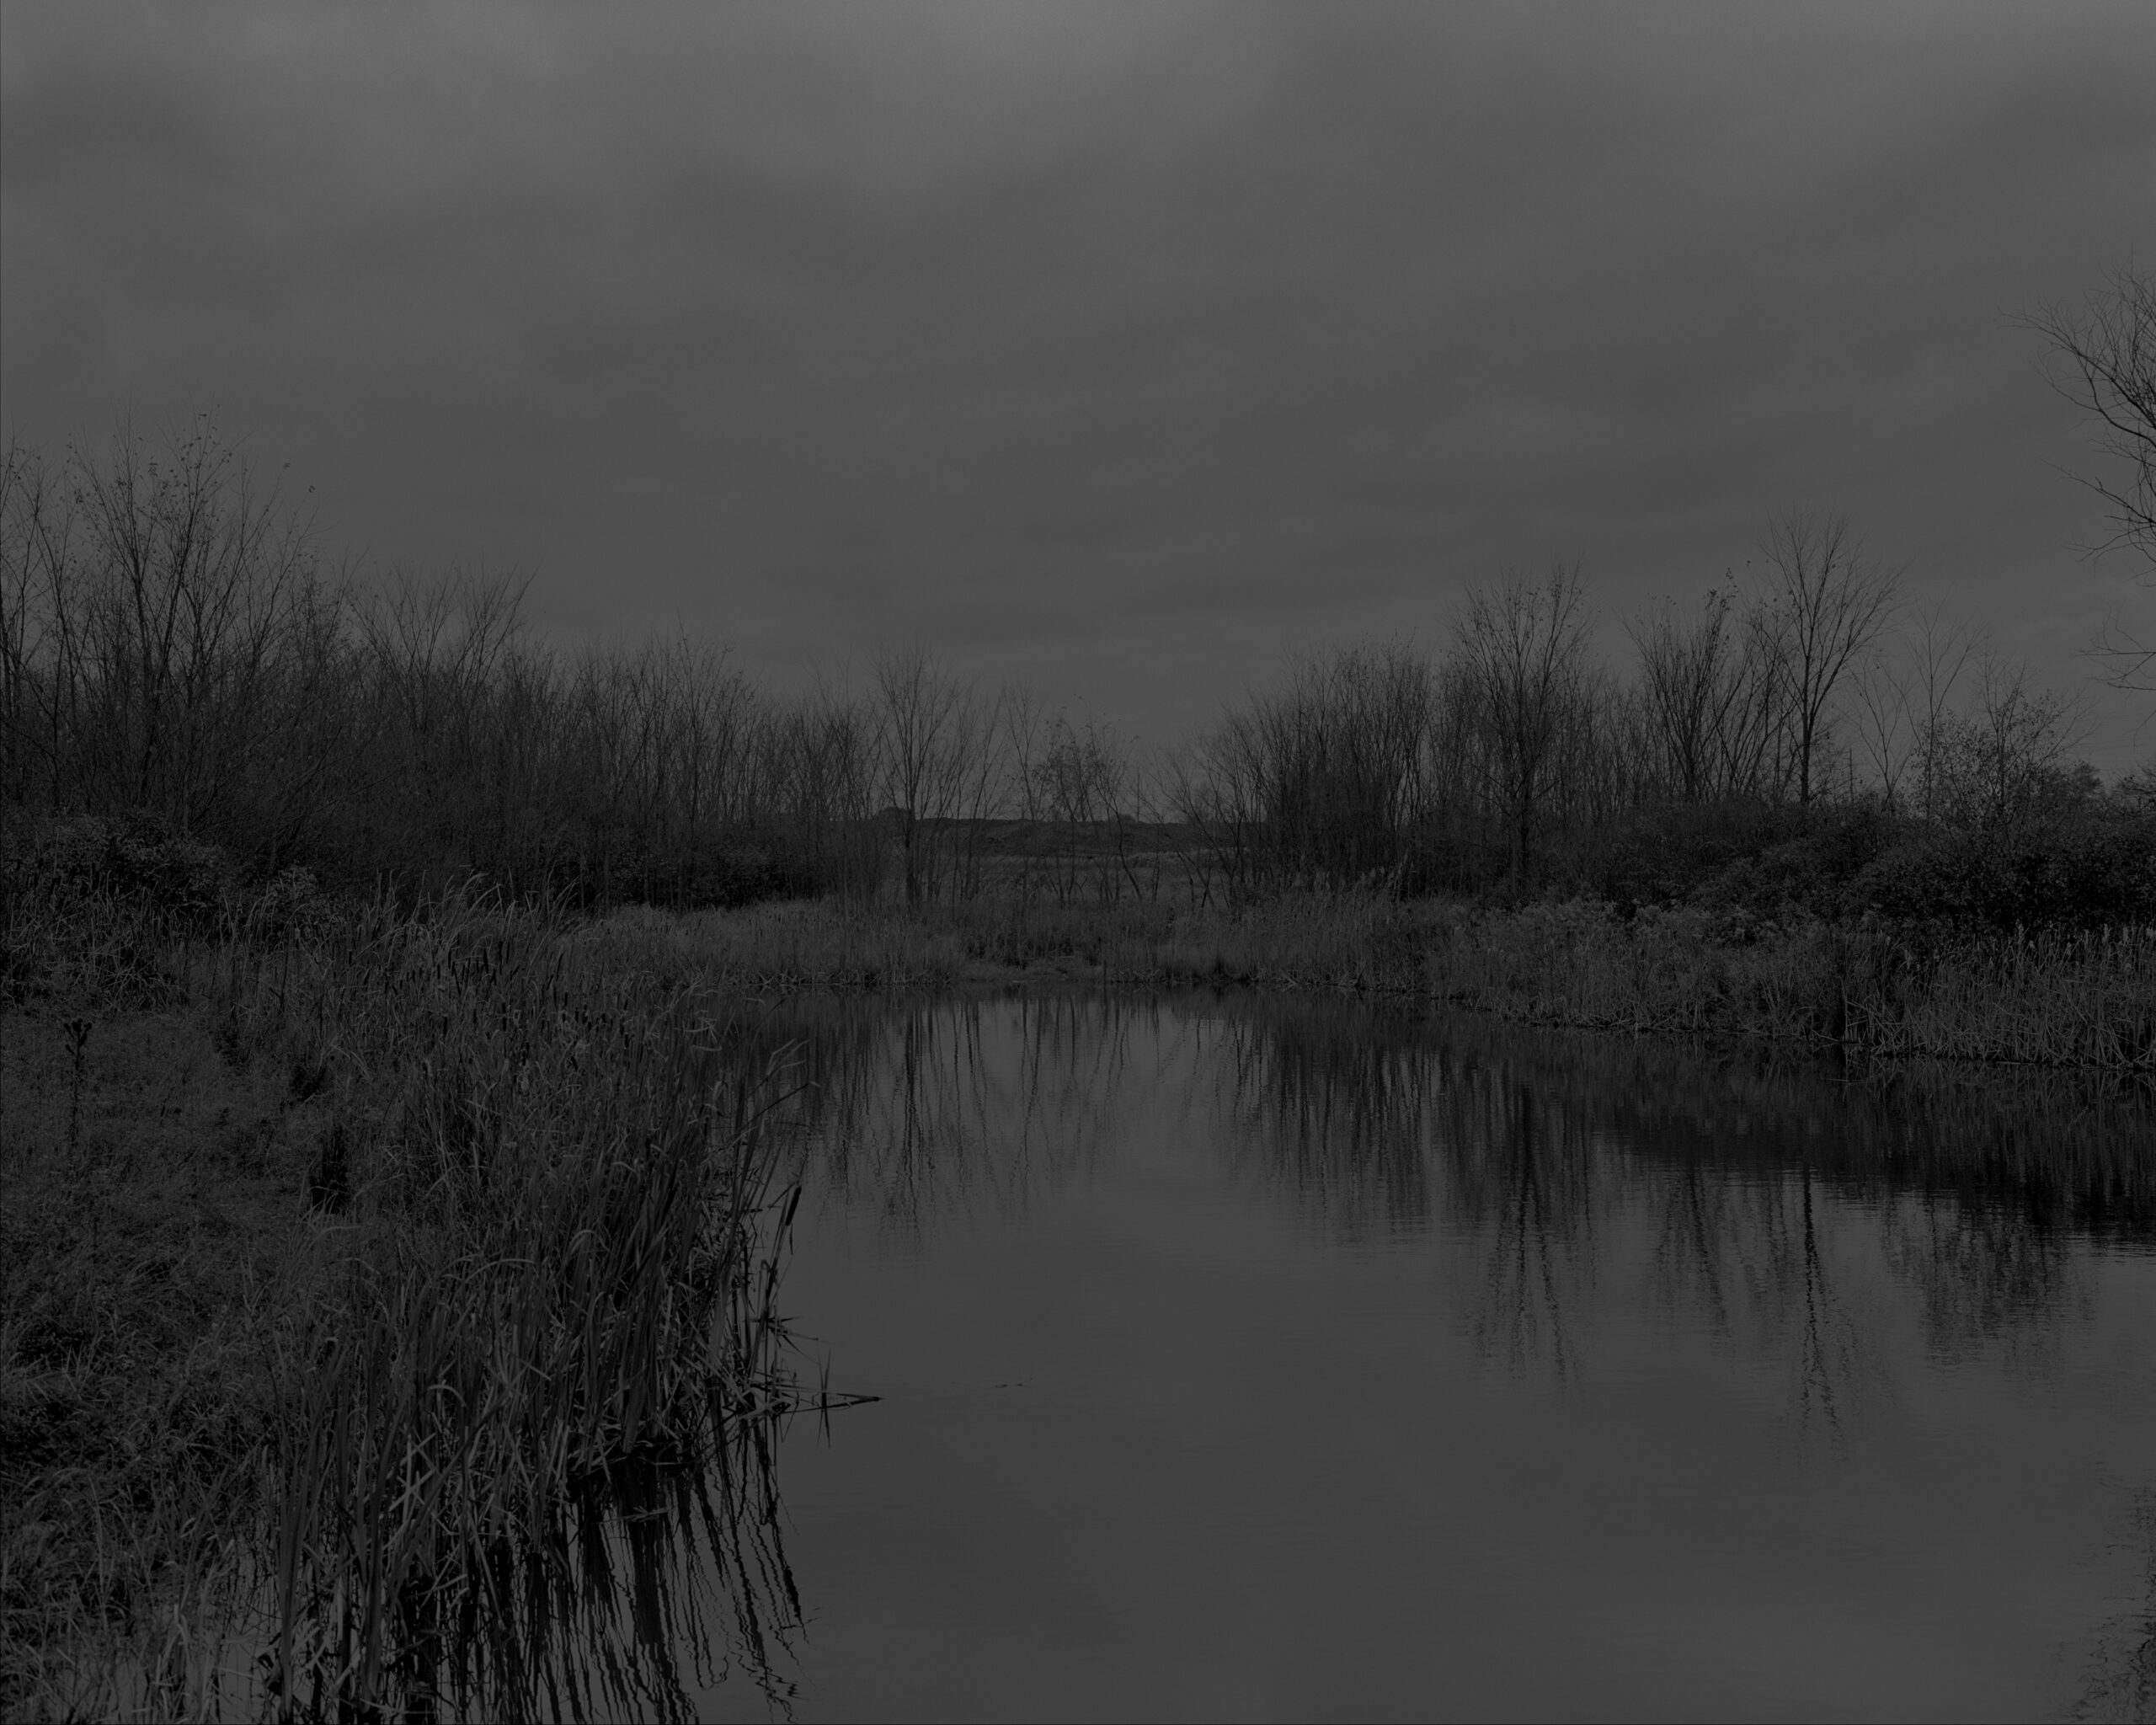 Dawoud Bey  American, born 1953 Untitled #12 (The Marsh) from the series Night Coming Tenderly, Black 2017 Gelatin silver print mounted to museum board and Dibond Museum Purchase with funds provided by The Contemporaries, in memory of Sylvia Goldberg and Donald Dick